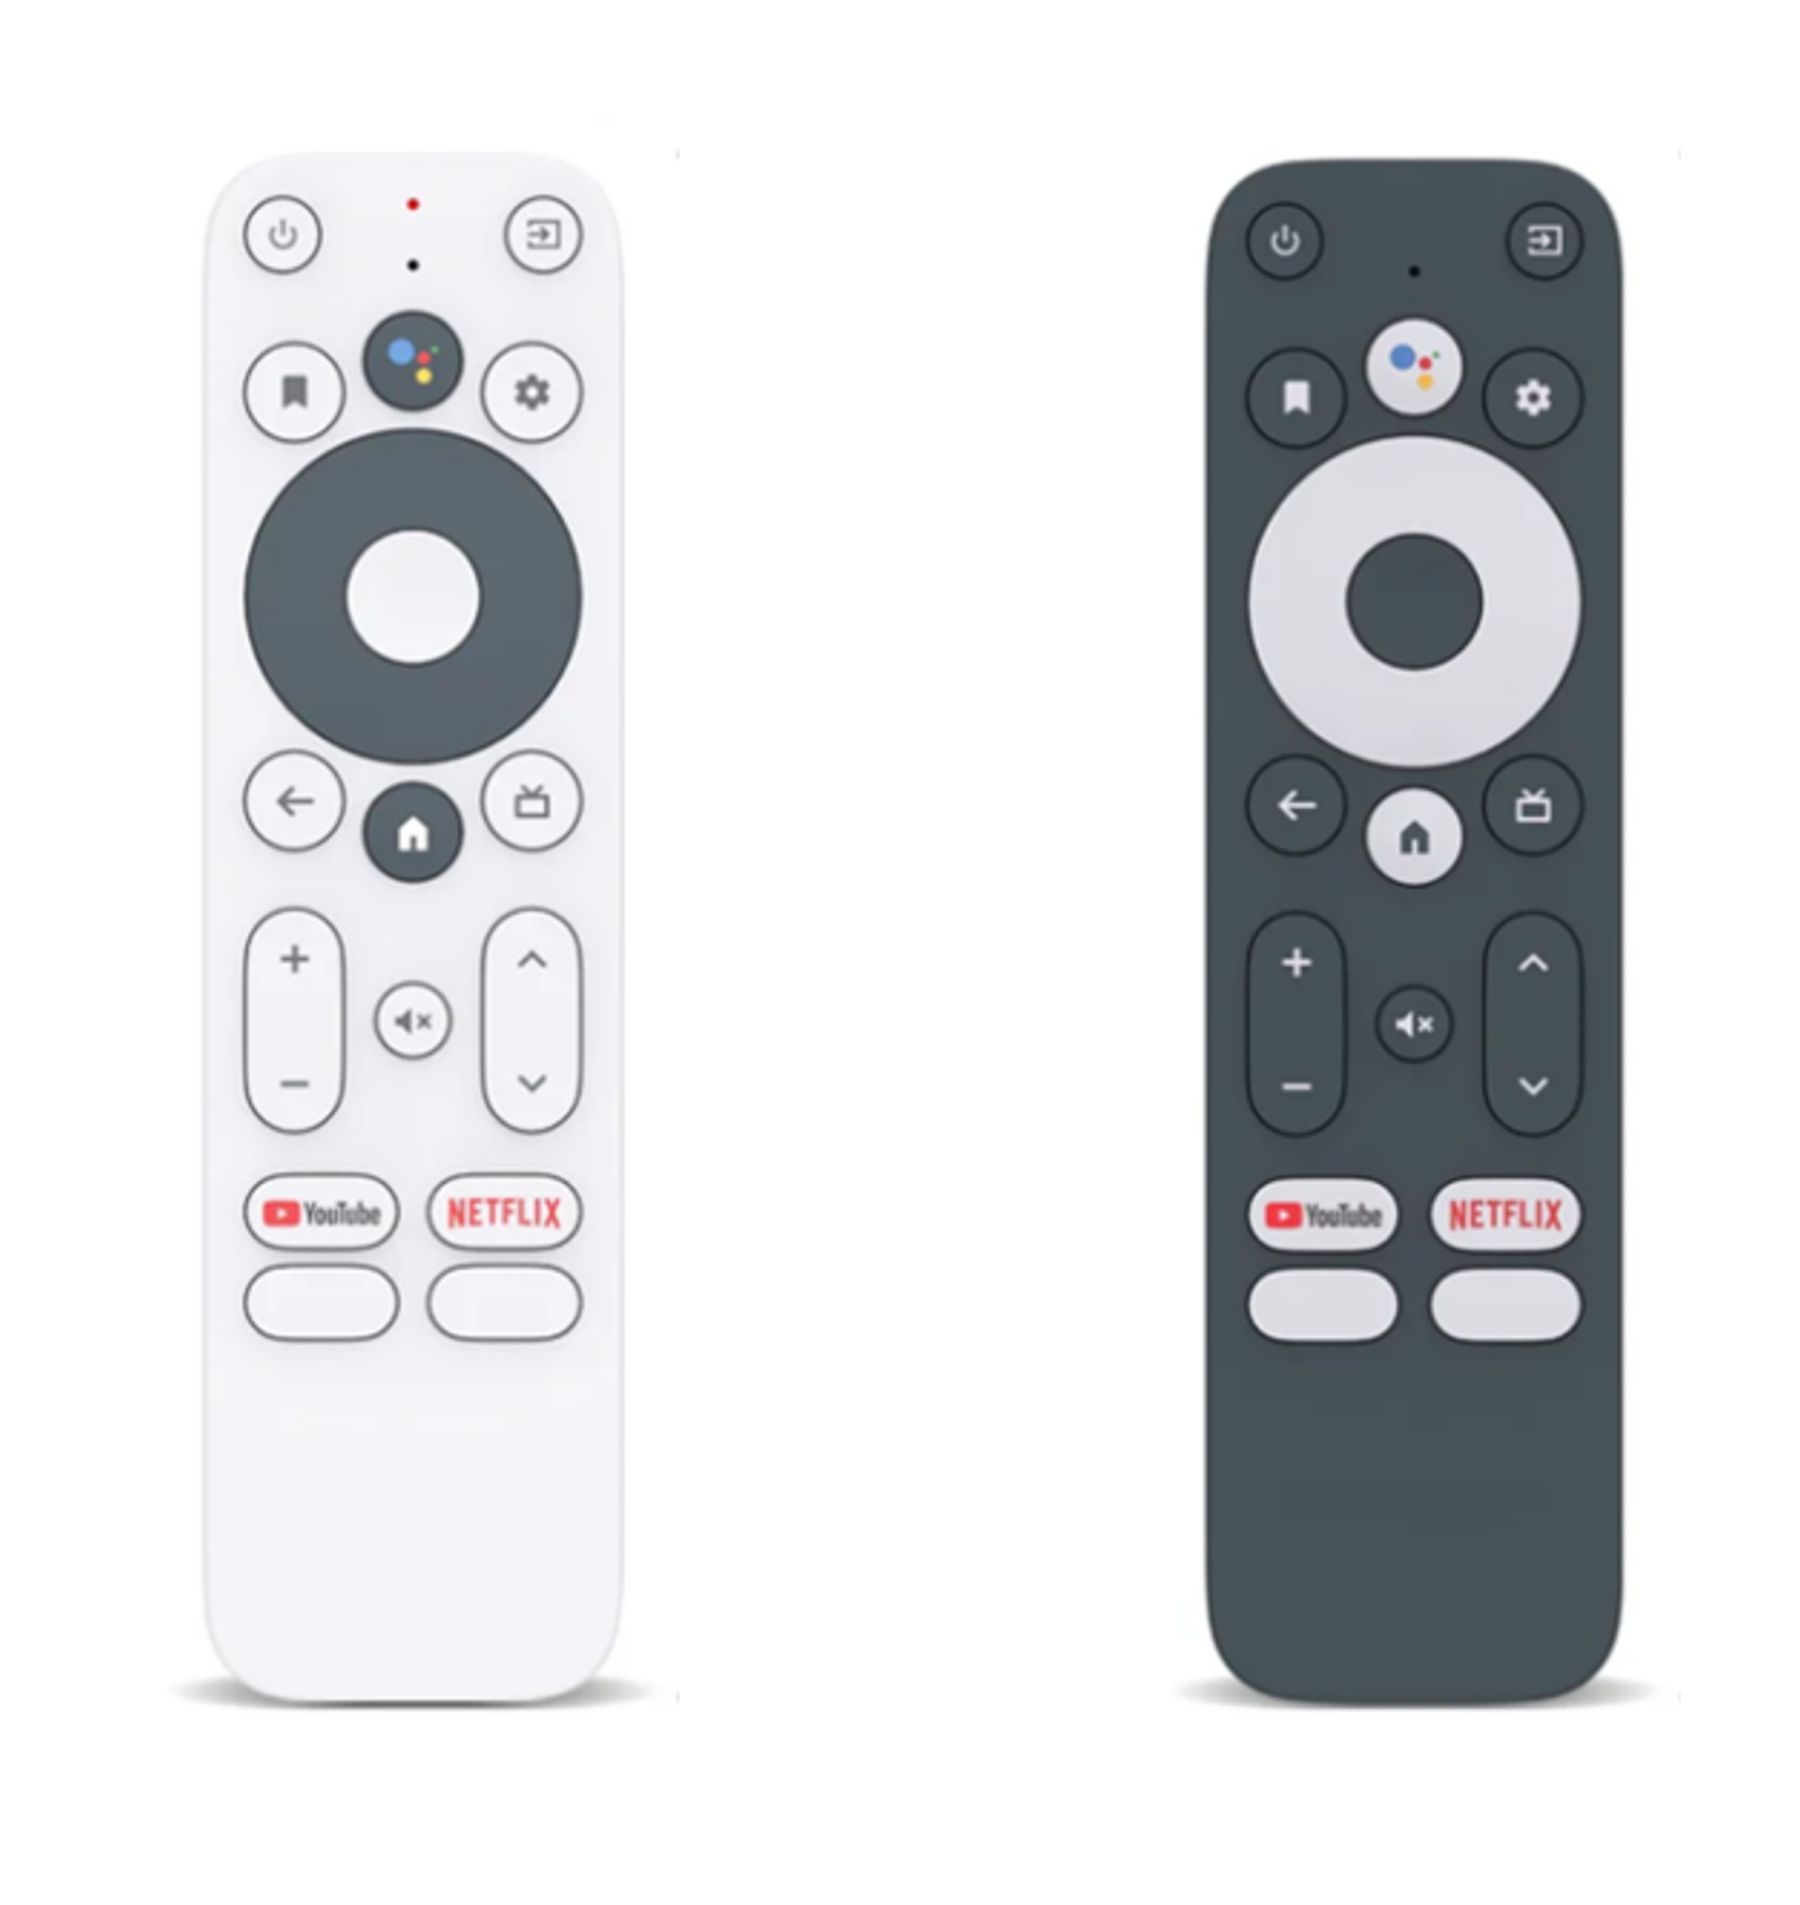 Atmosic’s Extremely Low-Power SoC Approved for Google Android TV Remote Controls